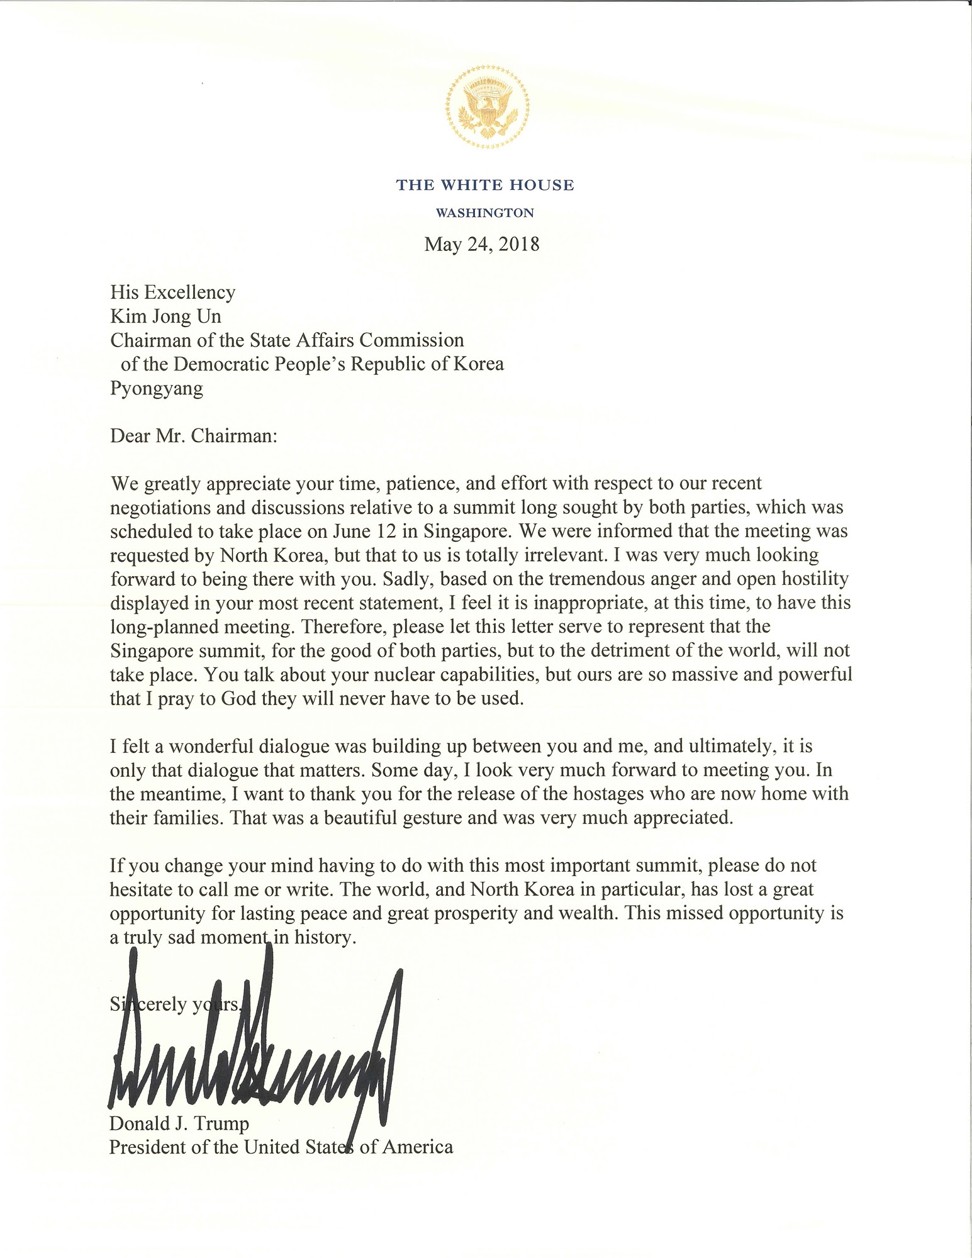 Donald Trump released this letter cancelling his meeting with Kim Jong-un, the same day Kim reportedly destroyed his nuclear weapons site. Image: The White House